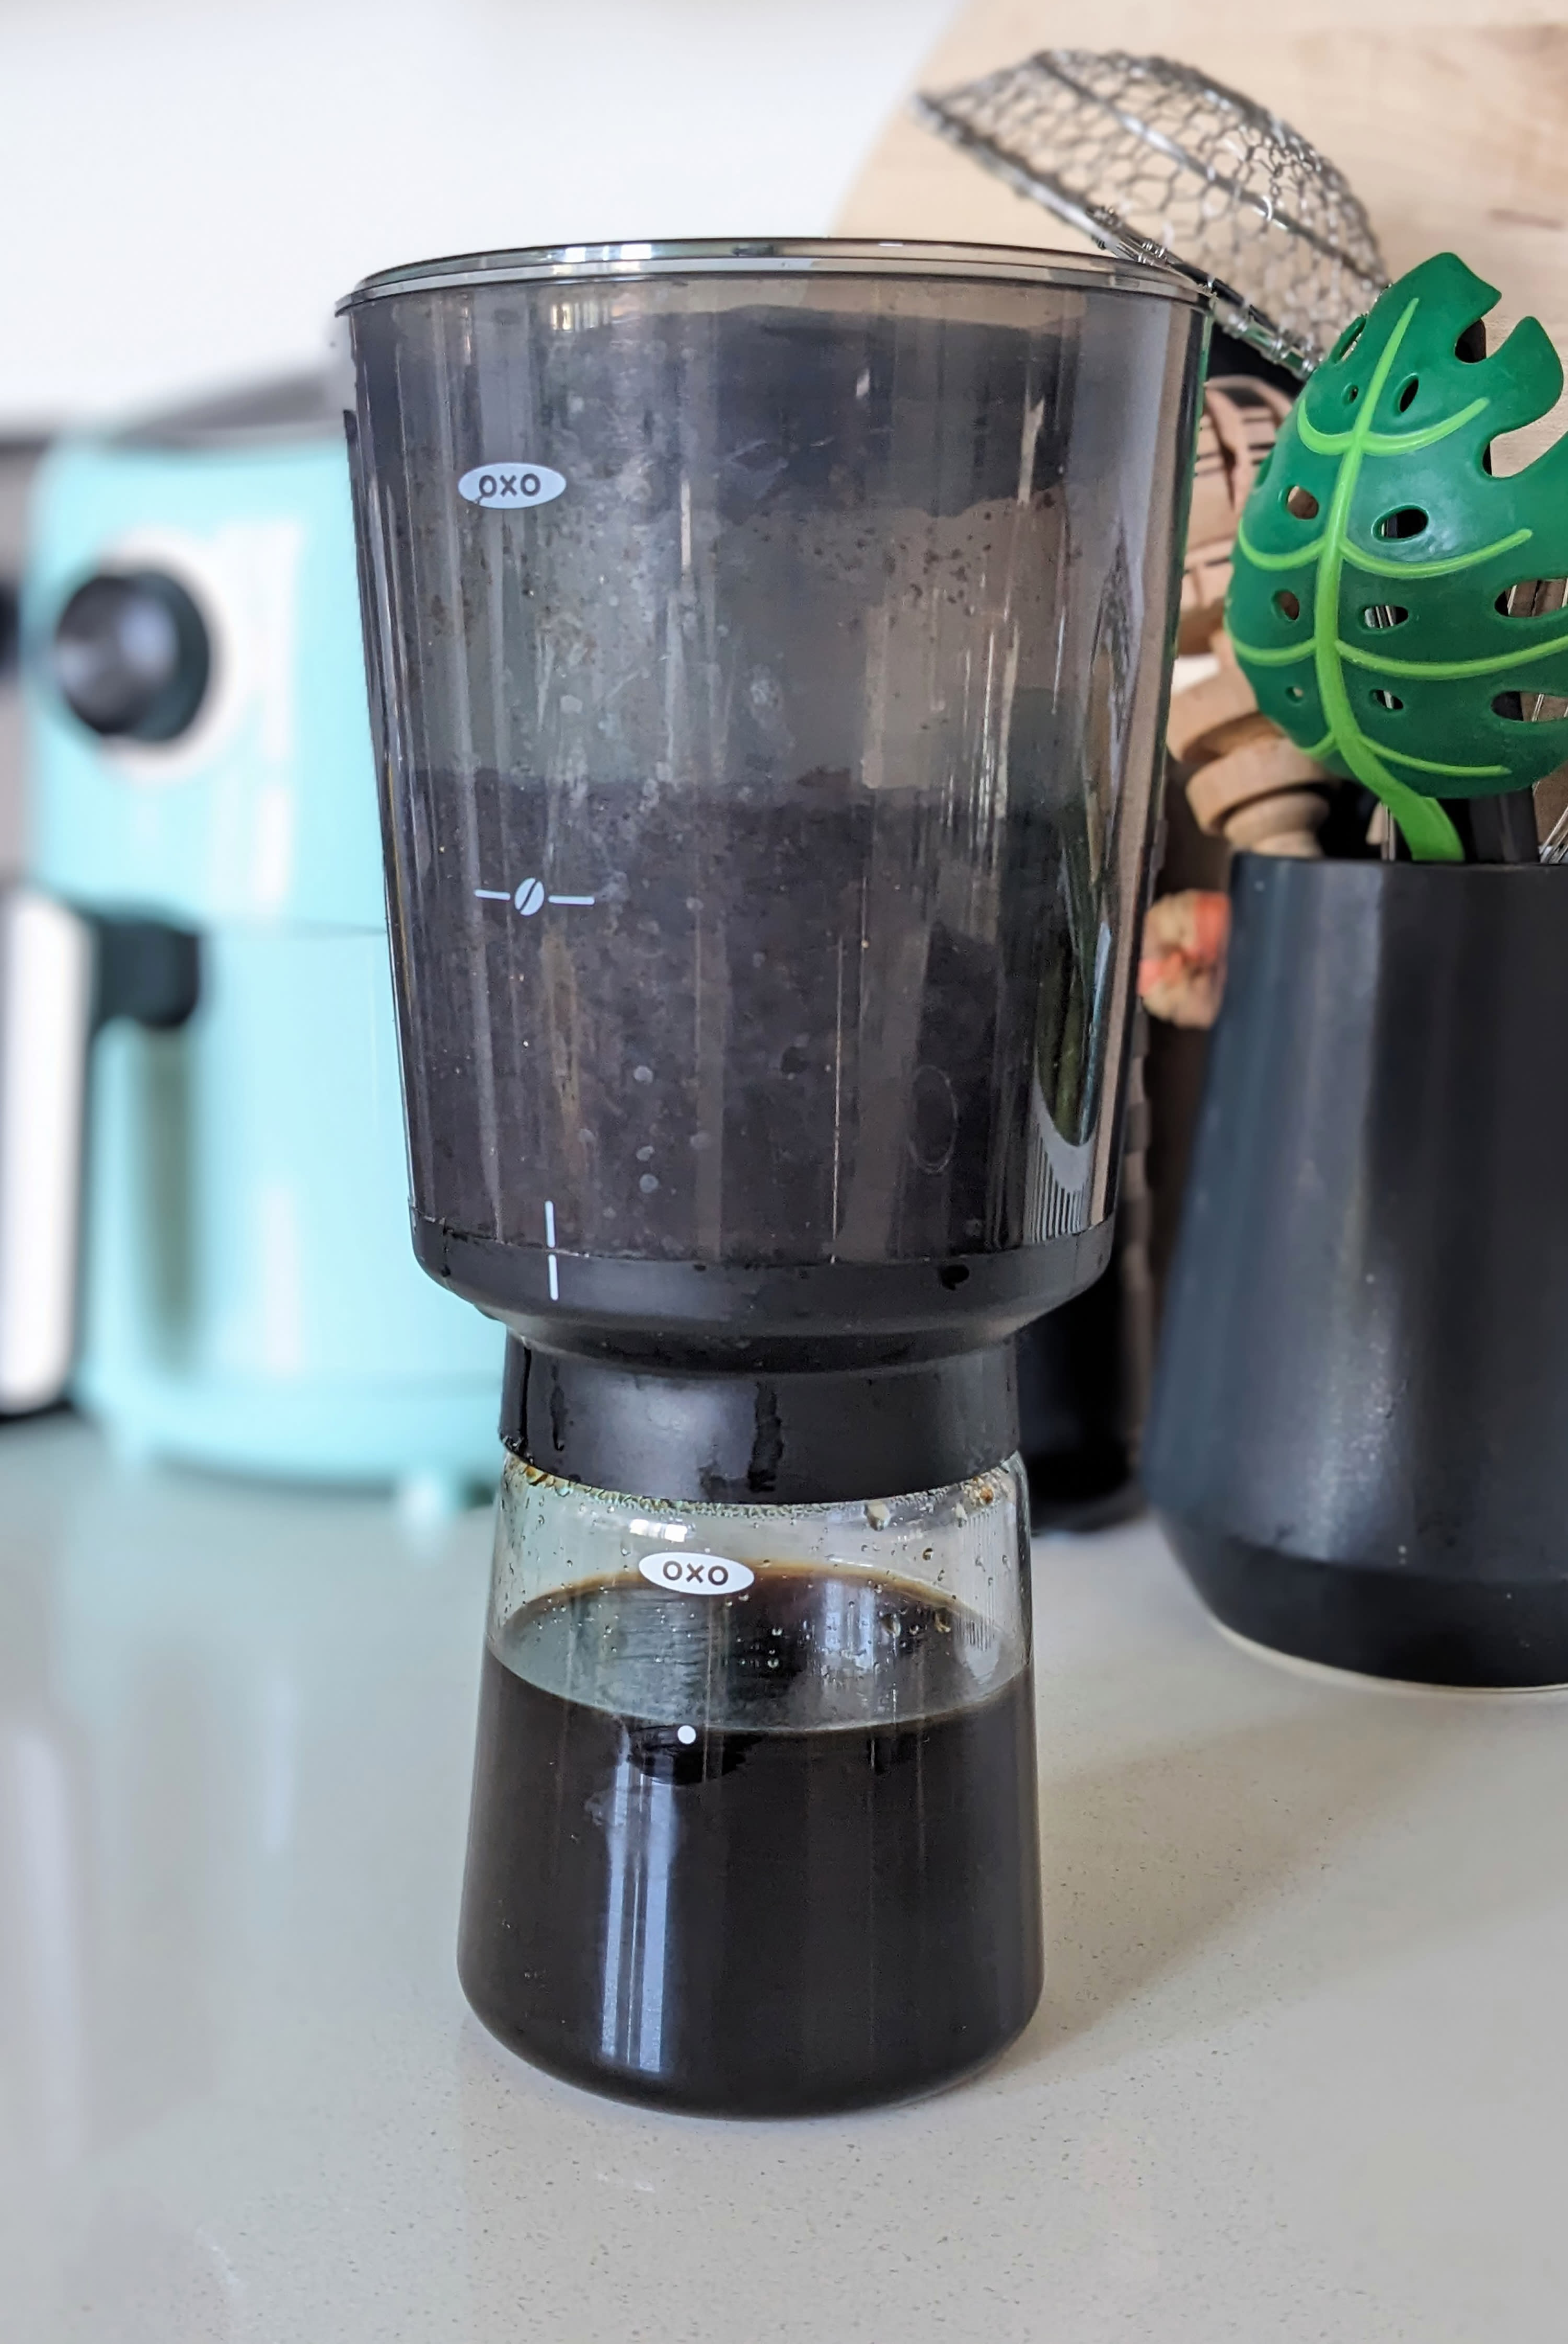 https://cdn.apartmenttherapy.info/image/upload/v1690835392/k/shopping/2023-07/oxo-brew-compact-cold-brew-coffee-maker-review/oxo-brew-compact-cold-brew-coffee-maker-review-6199.jpg